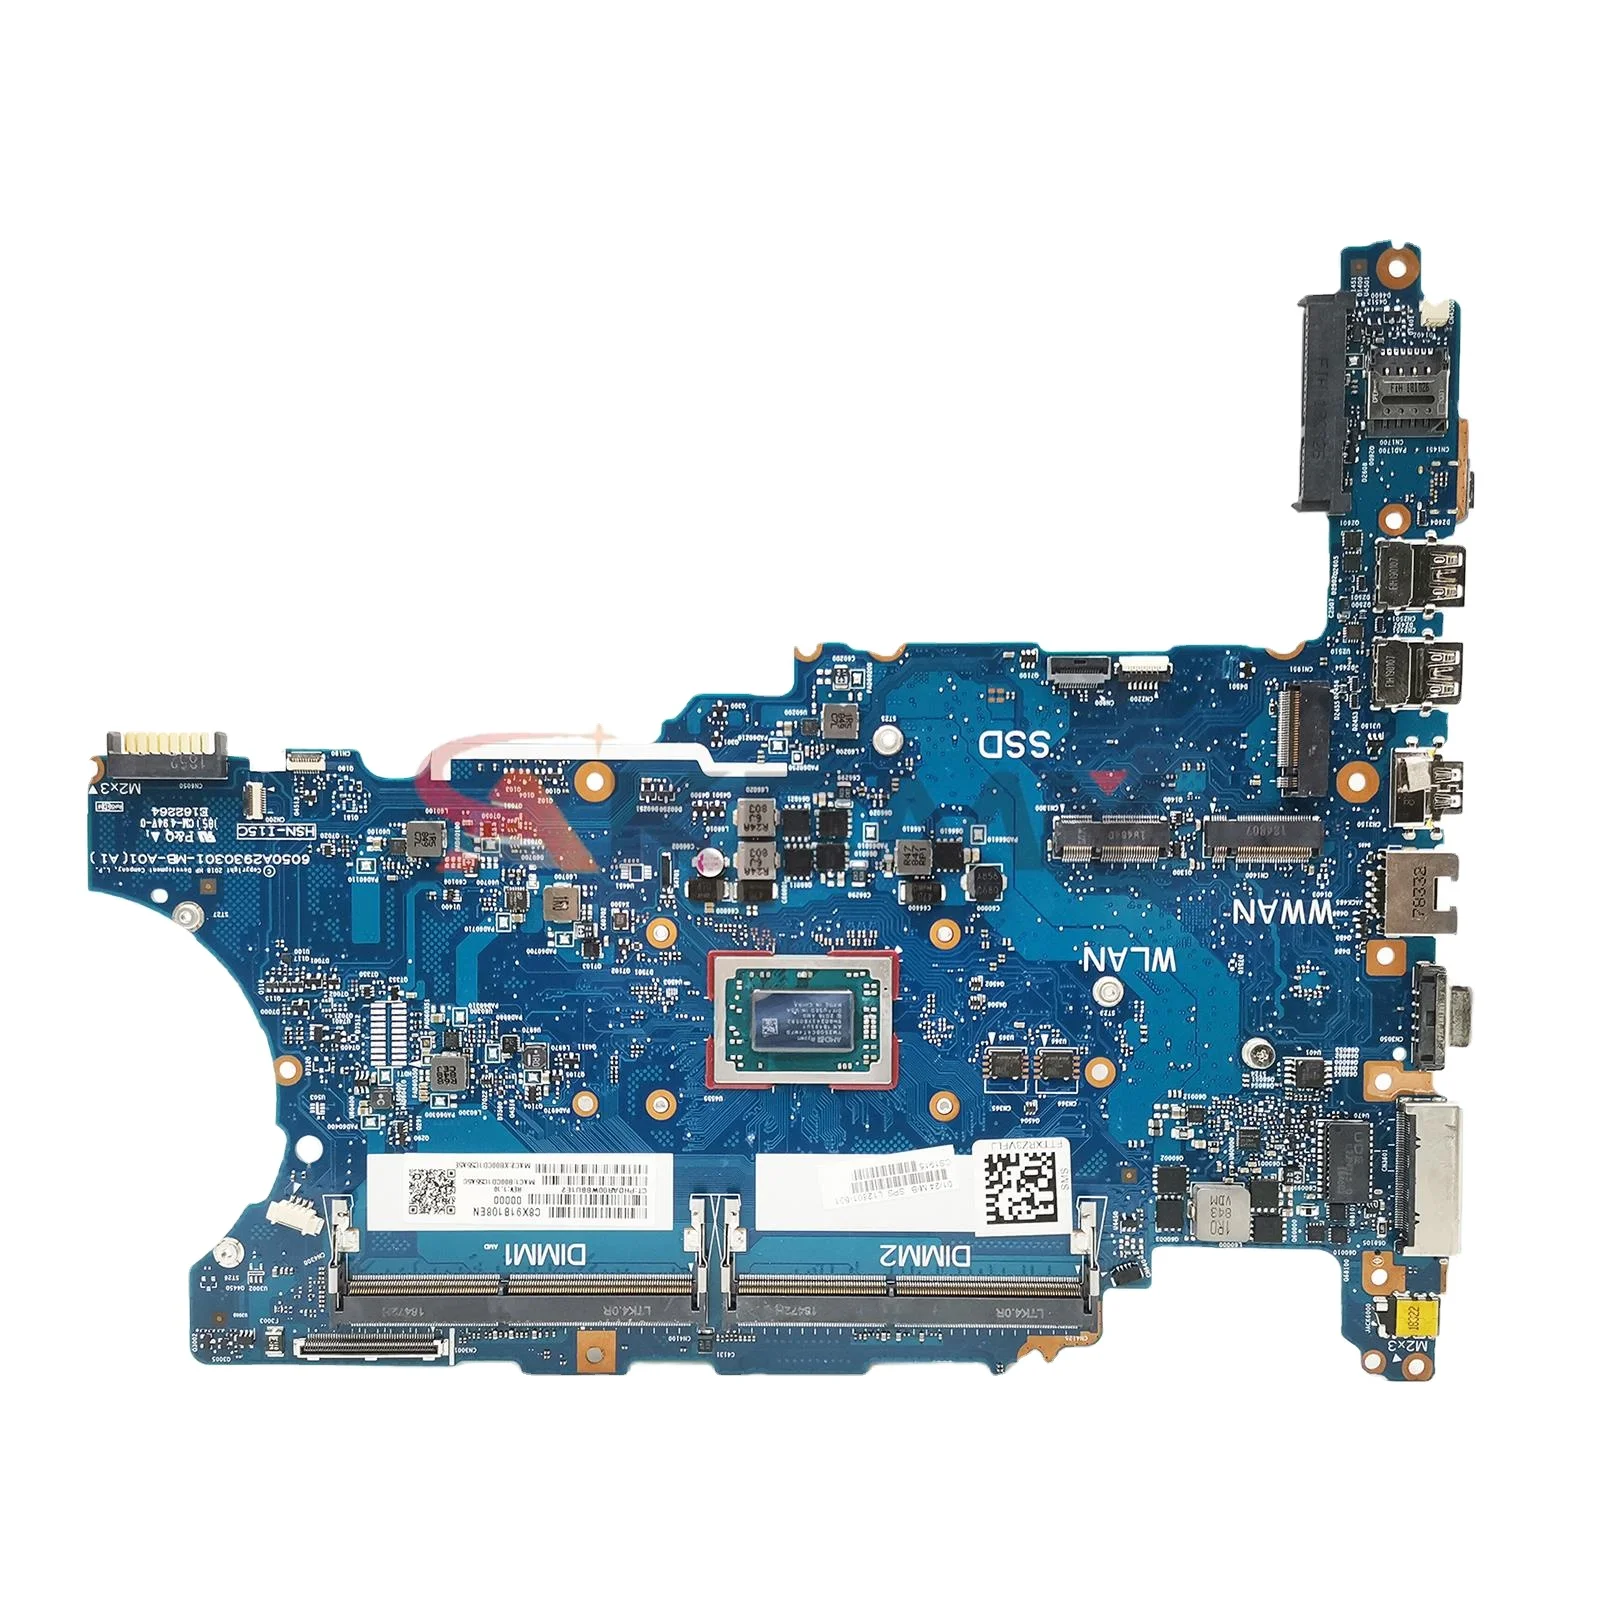 

6050A2930301-MB-A01 Mainboard For HP ProBook 645 G4 655 G4 HSN-I15C Laptop Motherboard With R3 /R5 /R7 CPU L12801-601 DDR4